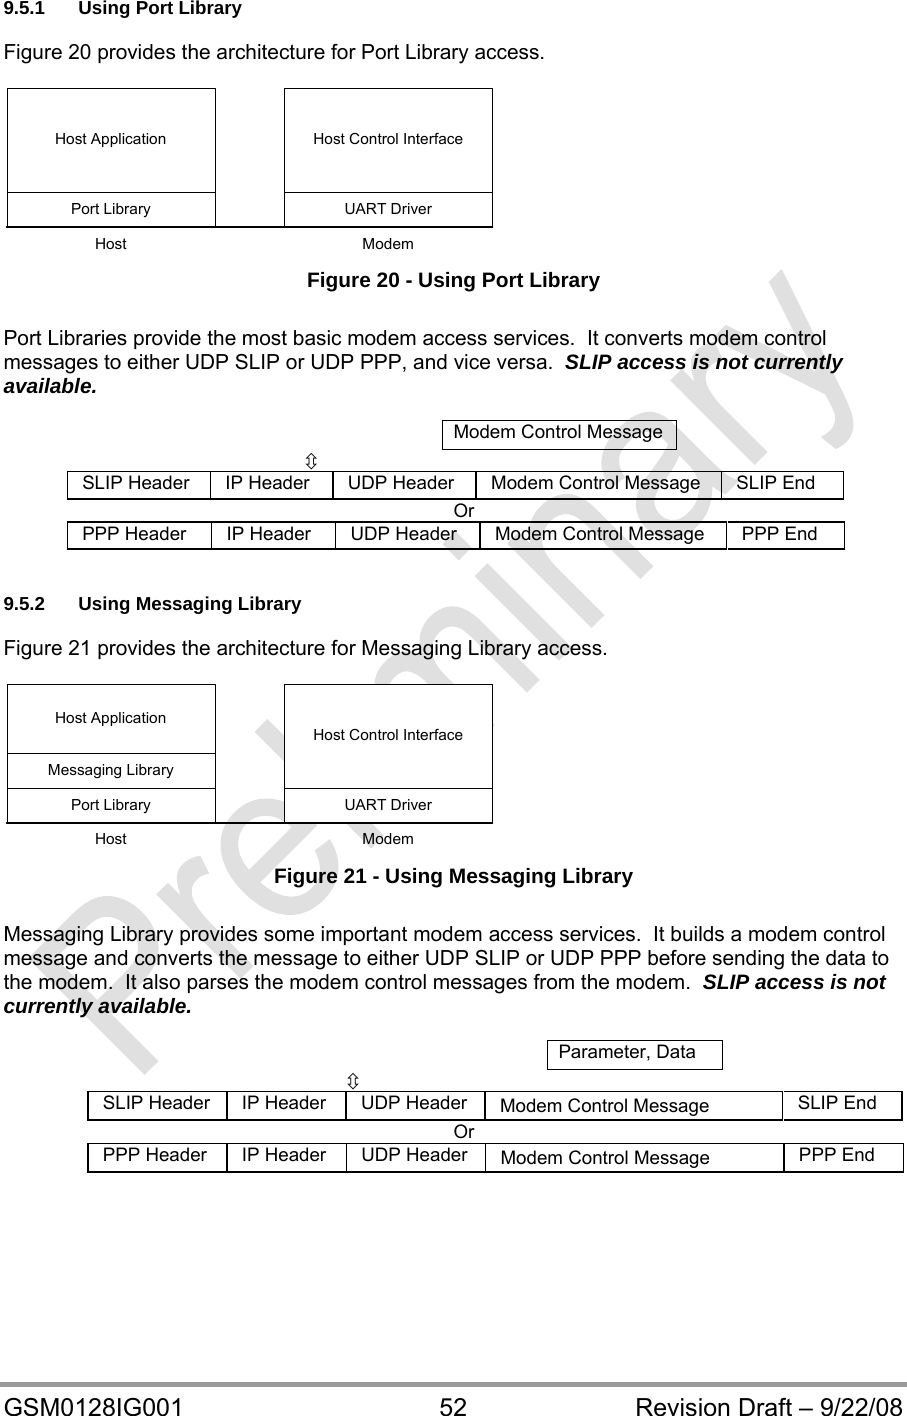  GSM0128IG001  52  Revision Draft – 9/22/08 9.5.1  Using Port Library   Figure 20 provides the architecture for Port Library access.  UART DriverPort LibraryHost Control InterfaceHost ApplicationHost Modem  Figure 20 - Using Port Library  Port Libraries provide the most basic modem access services.  It converts modem control messages to either UDP SLIP or UDP PPP, and vice versa.  SLIP access is not currently available.  Modem Control Message      SLIP Header  IP Header  UDP Header  Modem Control Message  SLIP End       Or PPP Header  IP Header  UDP Header  Modem Control Message  PPP End   9.5.2 Using Messaging Library   Figure 21 provides the architecture for Messaging Library access.  UART DriverPort LibraryHost Control InterfaceMessaging LibraryHost ApplicationHost Modem  Figure 21 - Using Messaging Library  Messaging Library provides some important modem access services.  It builds a modem control message and converts the message to either UDP SLIP or UDP PPP before sending the data to the modem.  It also parses the modem control messages from the modem.  SLIP access is not currently available.  Parameter, Data                   SLIP Header  IP Header  UDP Header  Modem Control Message  SLIP End       Or PPP Header  IP Header  UDP Header  Modem Control Message  PPP End  